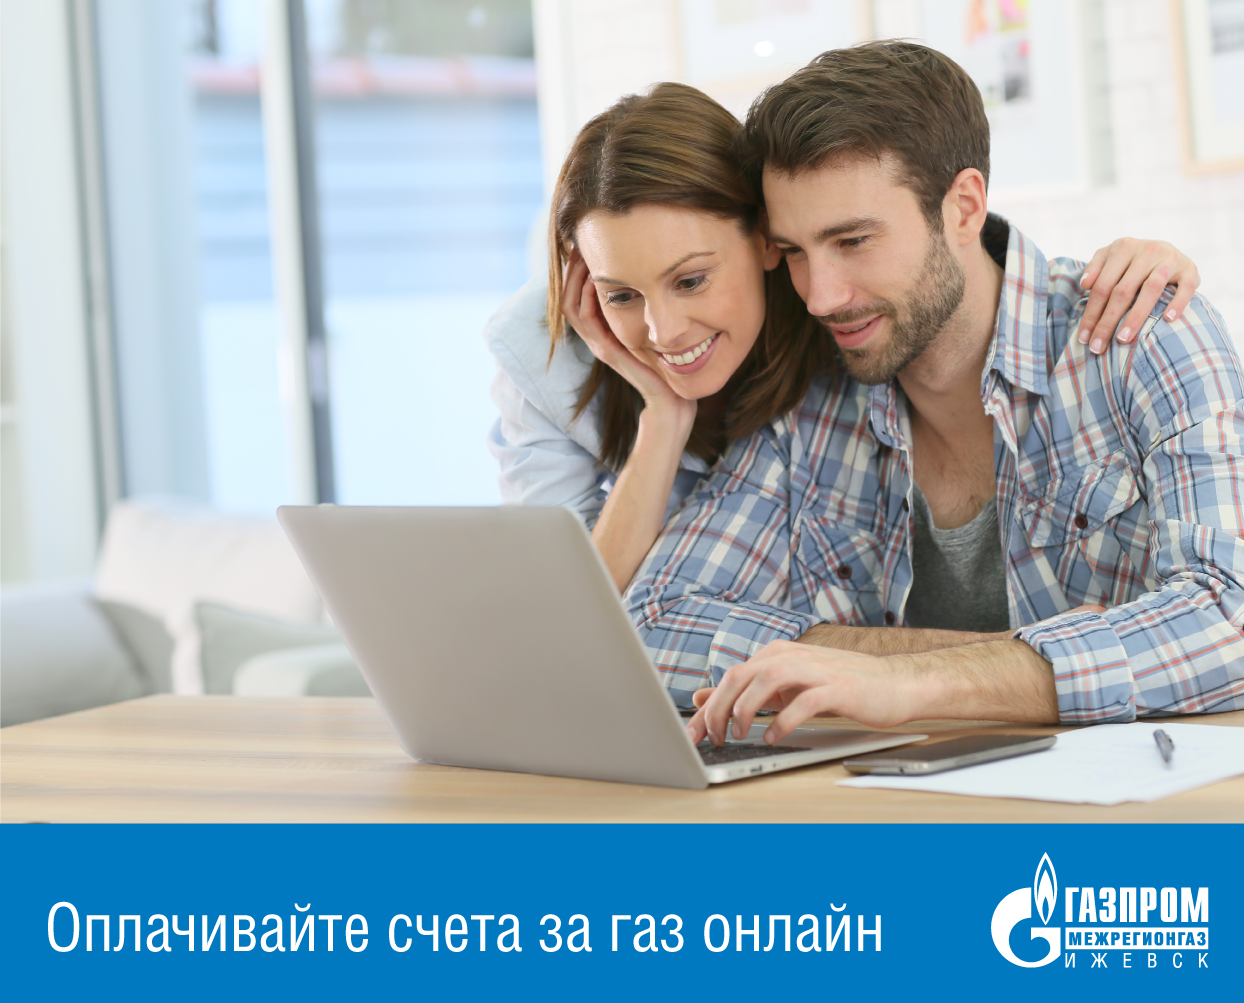 Subscriber base of Gazprom Mezhregiongaz Izhevsk’s online services grows by over 9,000 users